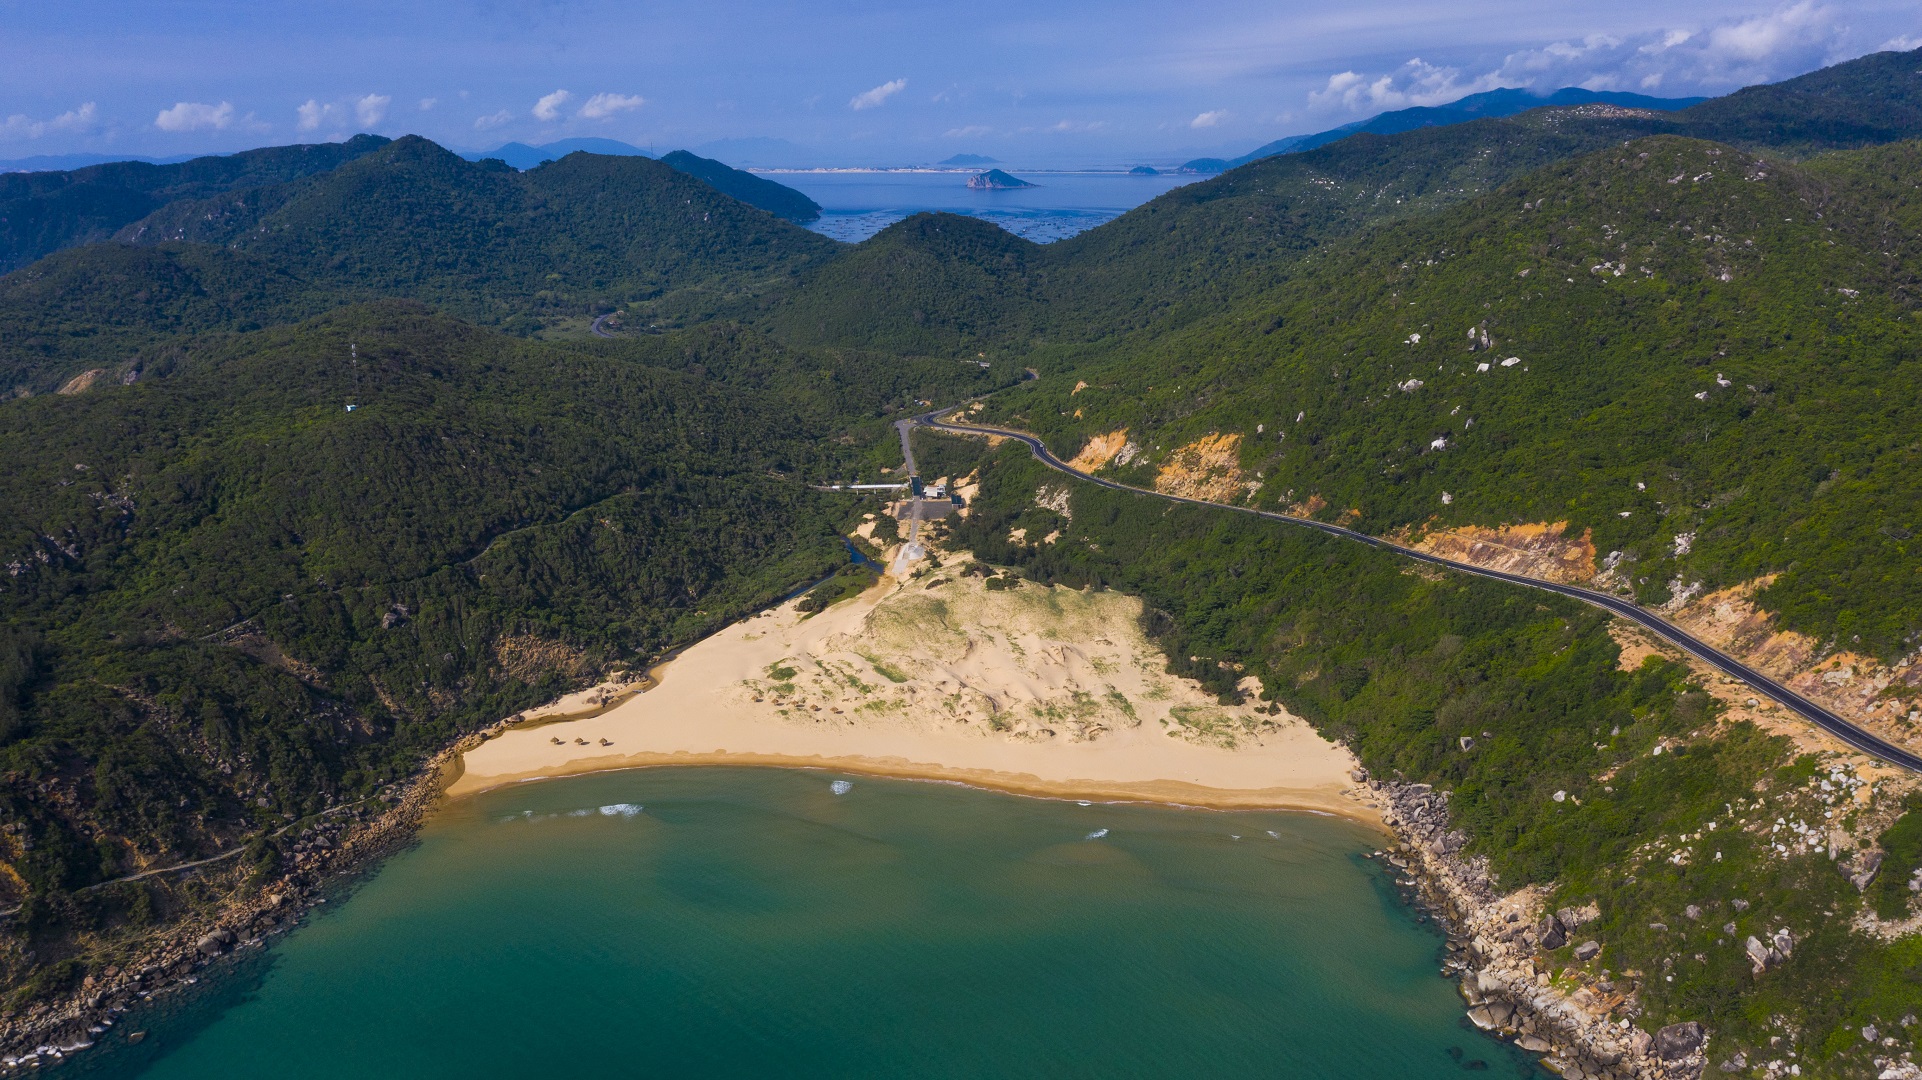 A road through mountains and sea in the central province of Phu Yen seen from above. Photo: Quang Dinh / Tuoi Tre News